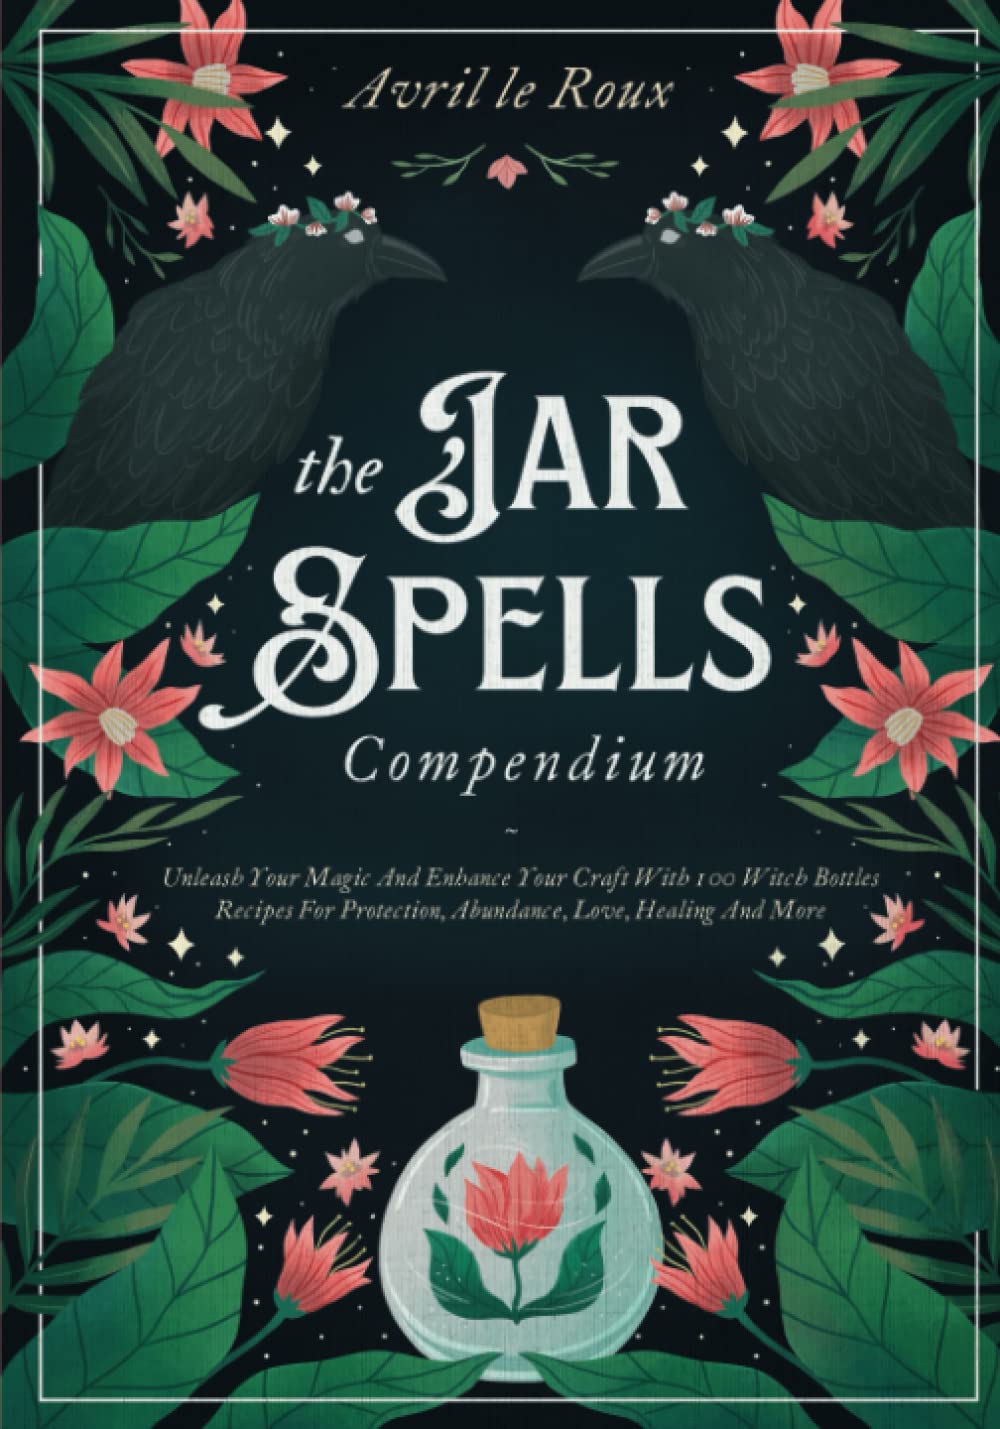 The Jar Spells Compendium: Unleash Your Magic and Enhance Your Craft With 100 Witch Bottles Recipes for Protection, Abundance, Love, Healing, and More